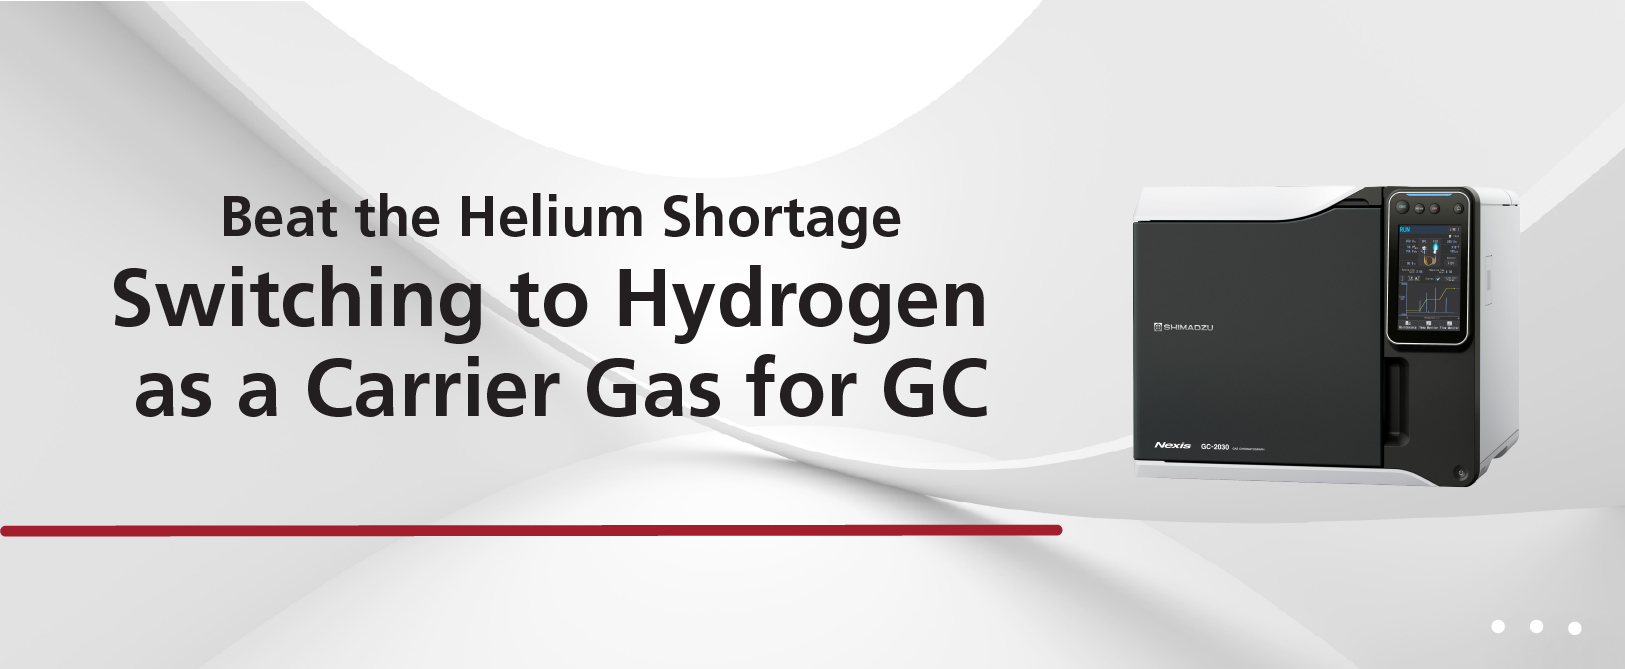 Beat the Helium Shortage, Switching to Hydrogen as a Carrier Gas for GC